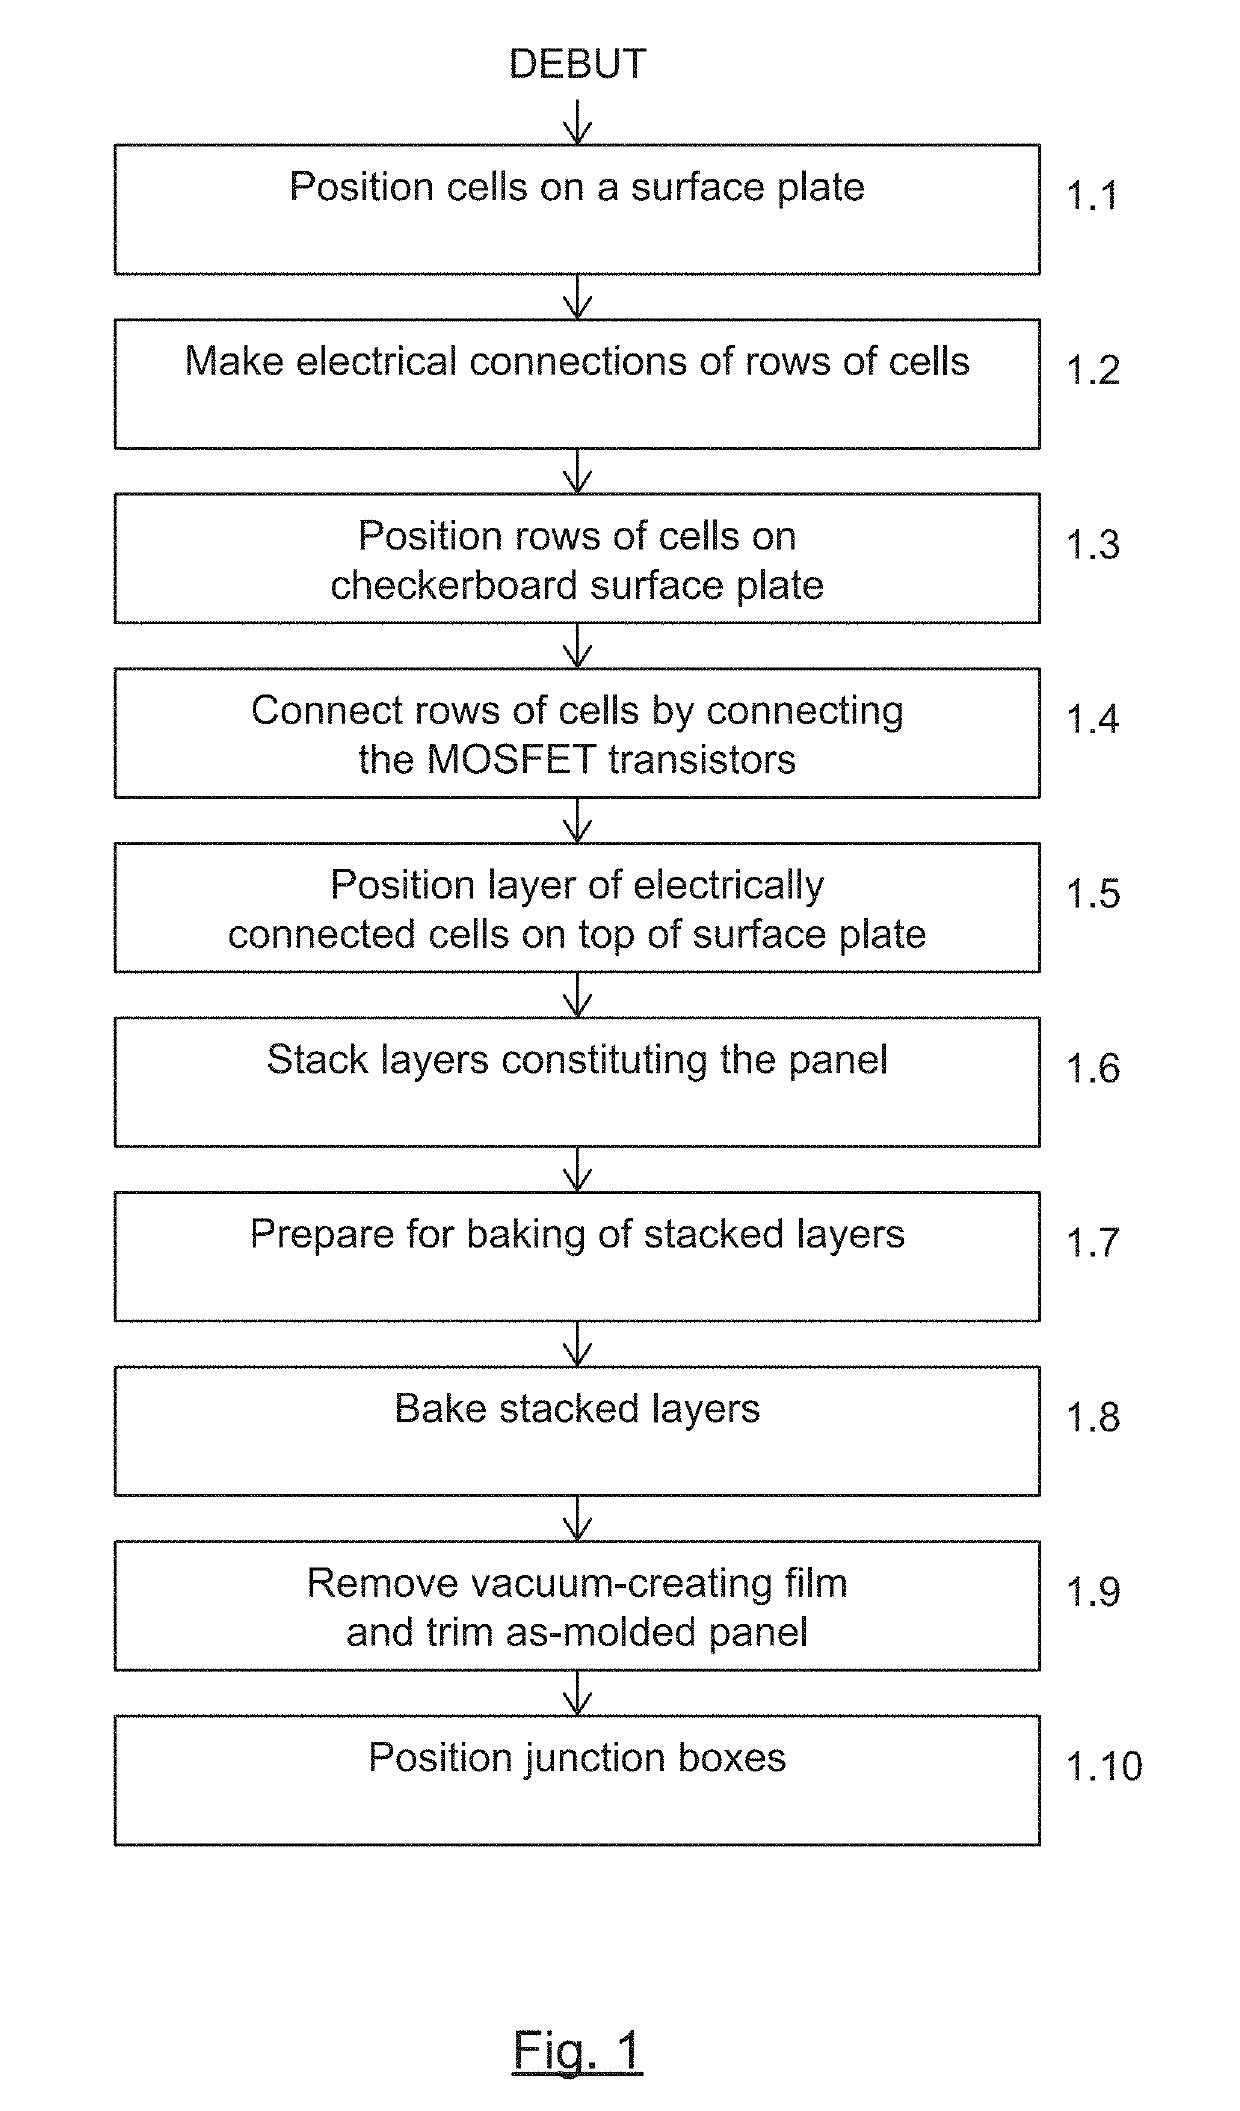 Method for the encapsulation of photovoltaic panels in using pre-impregnated materials